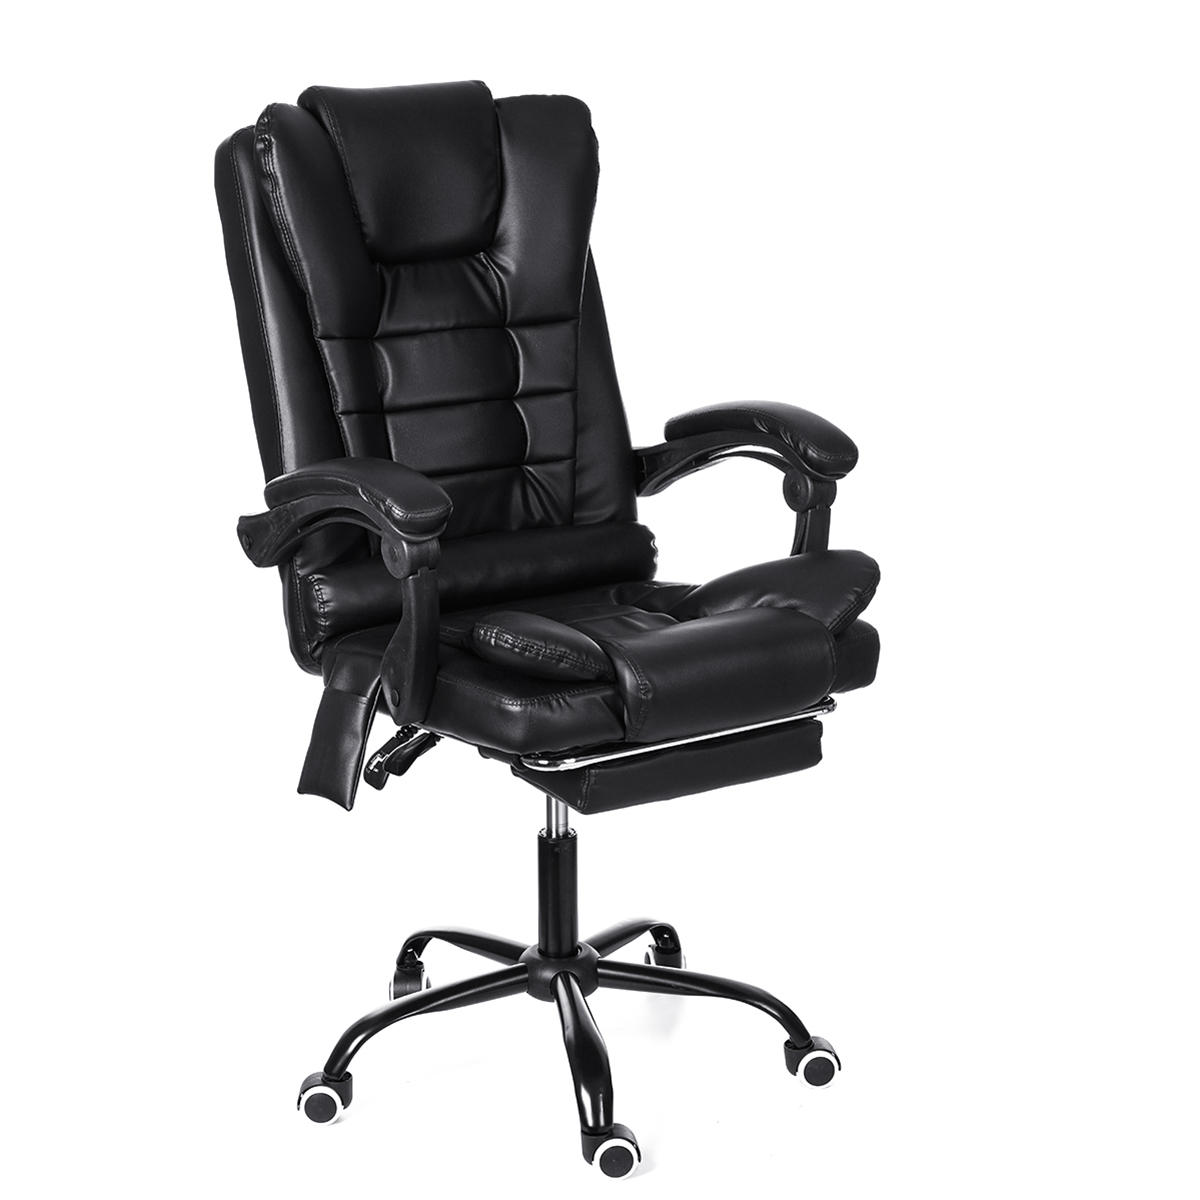 best price,snailhome,massage,reclining,office,chair,eu,coupon,price,discount